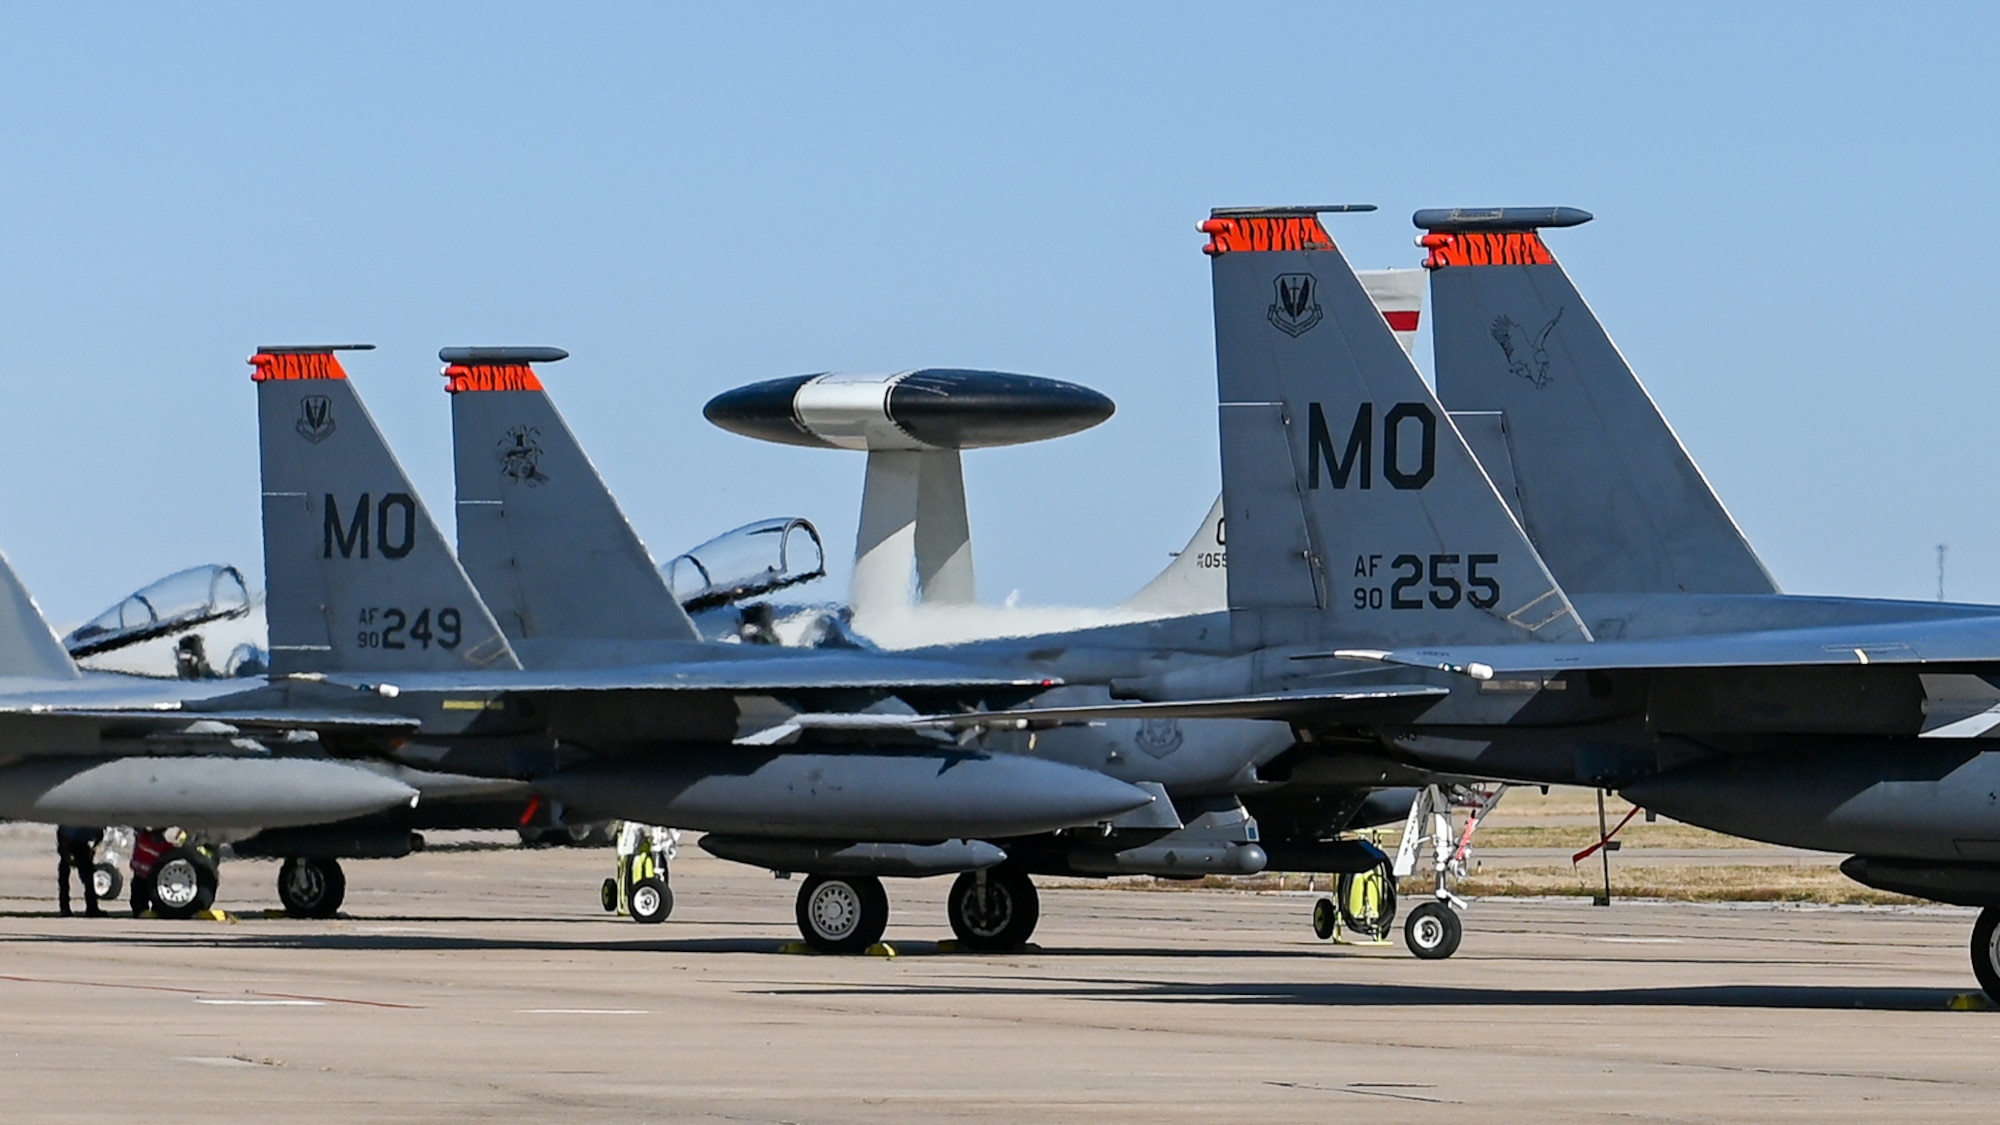 F-15 tails in front of E-3 rotodome